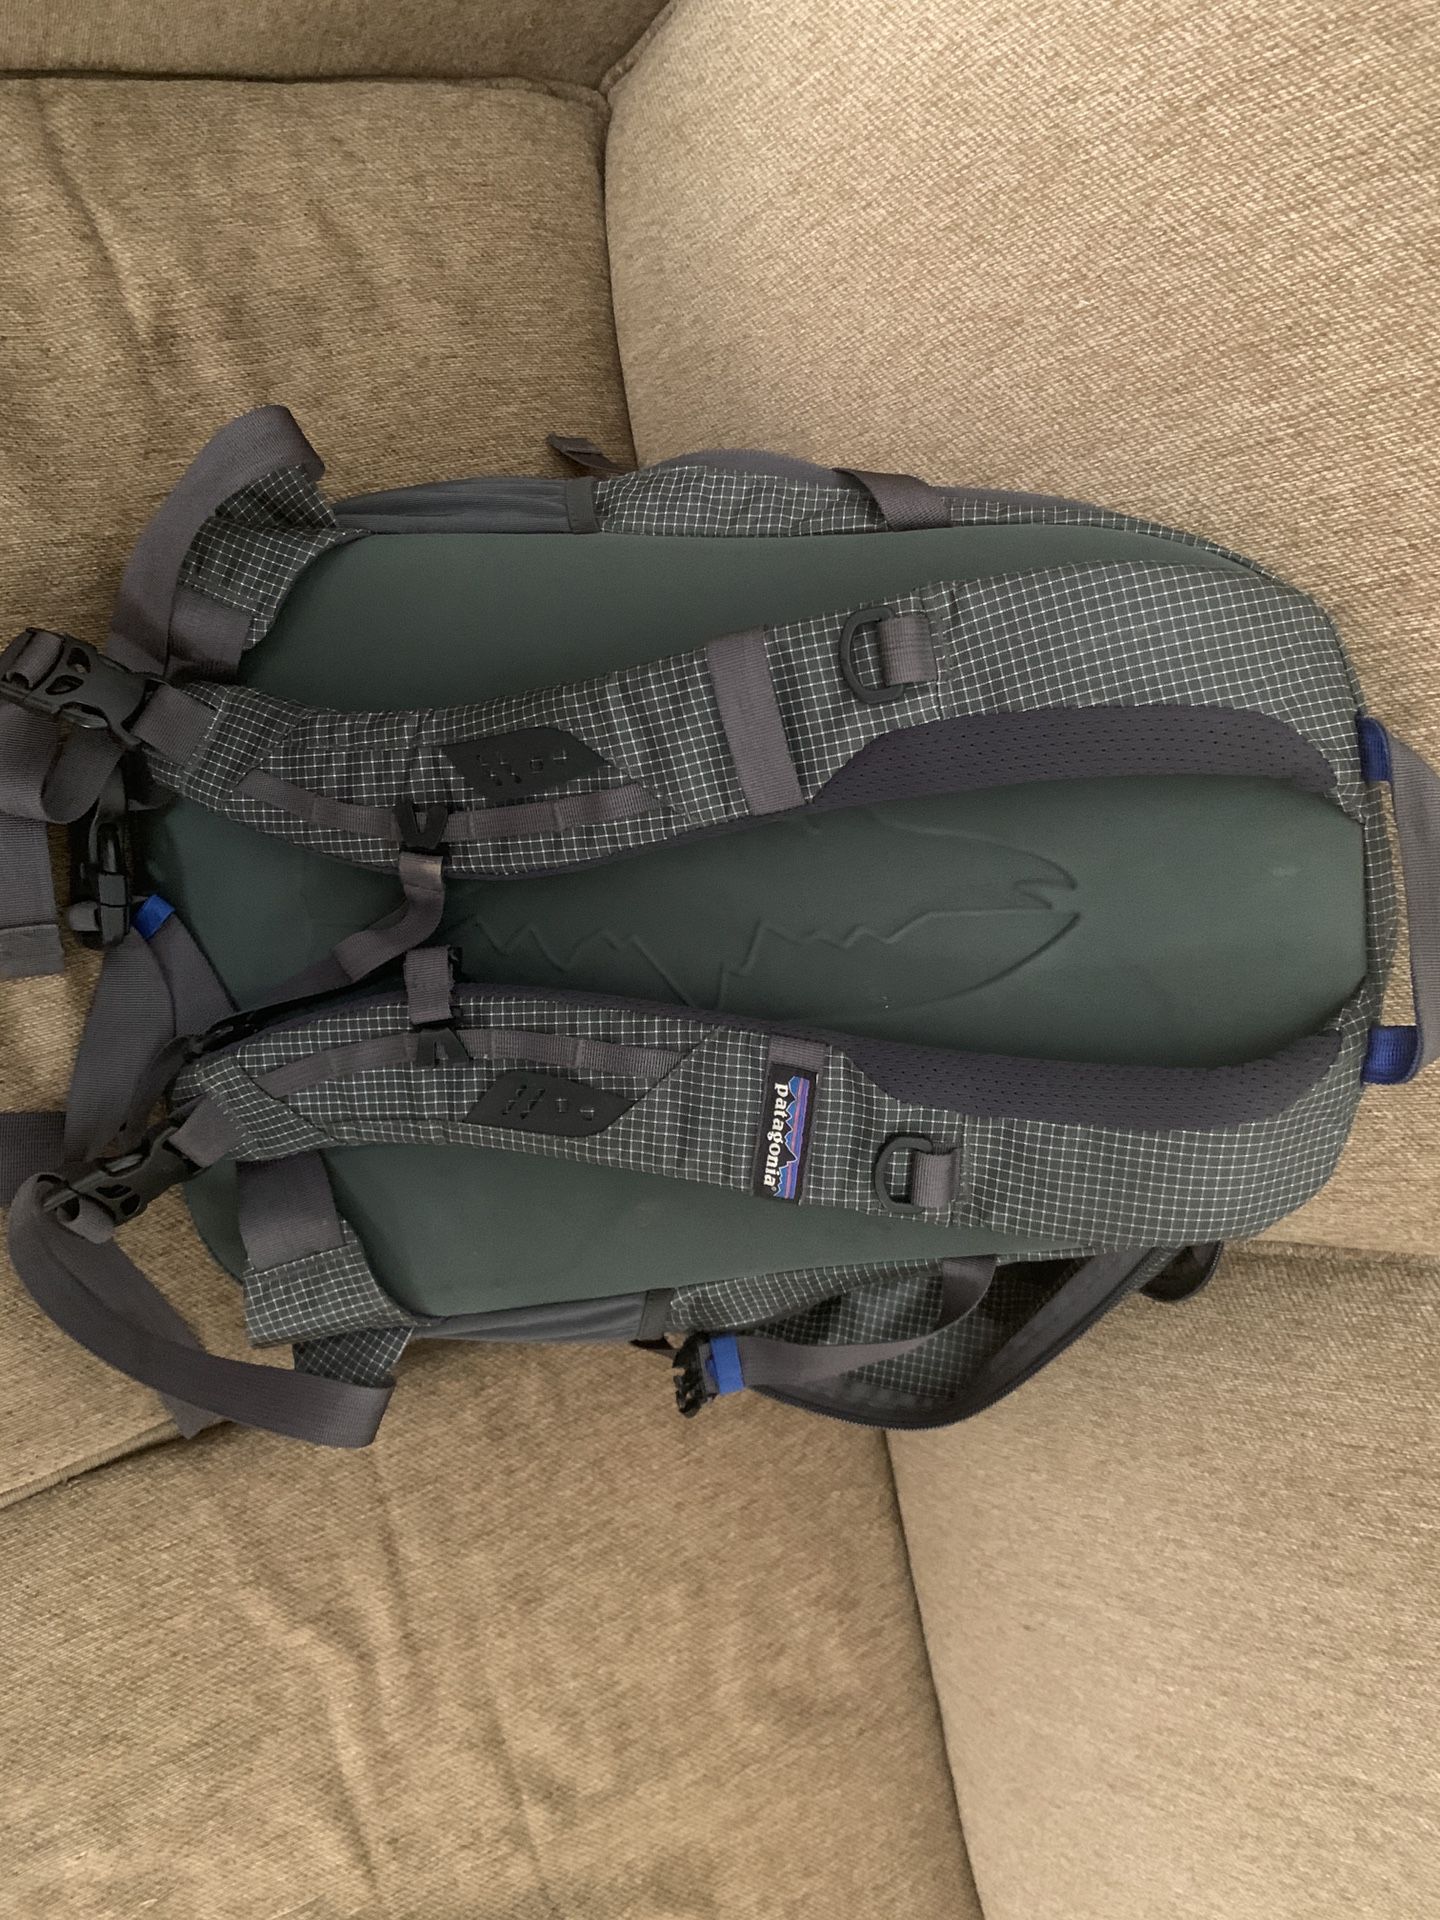 Patagonia Fly Fishing Backpack Vest Combo for Sale in Camas, WA